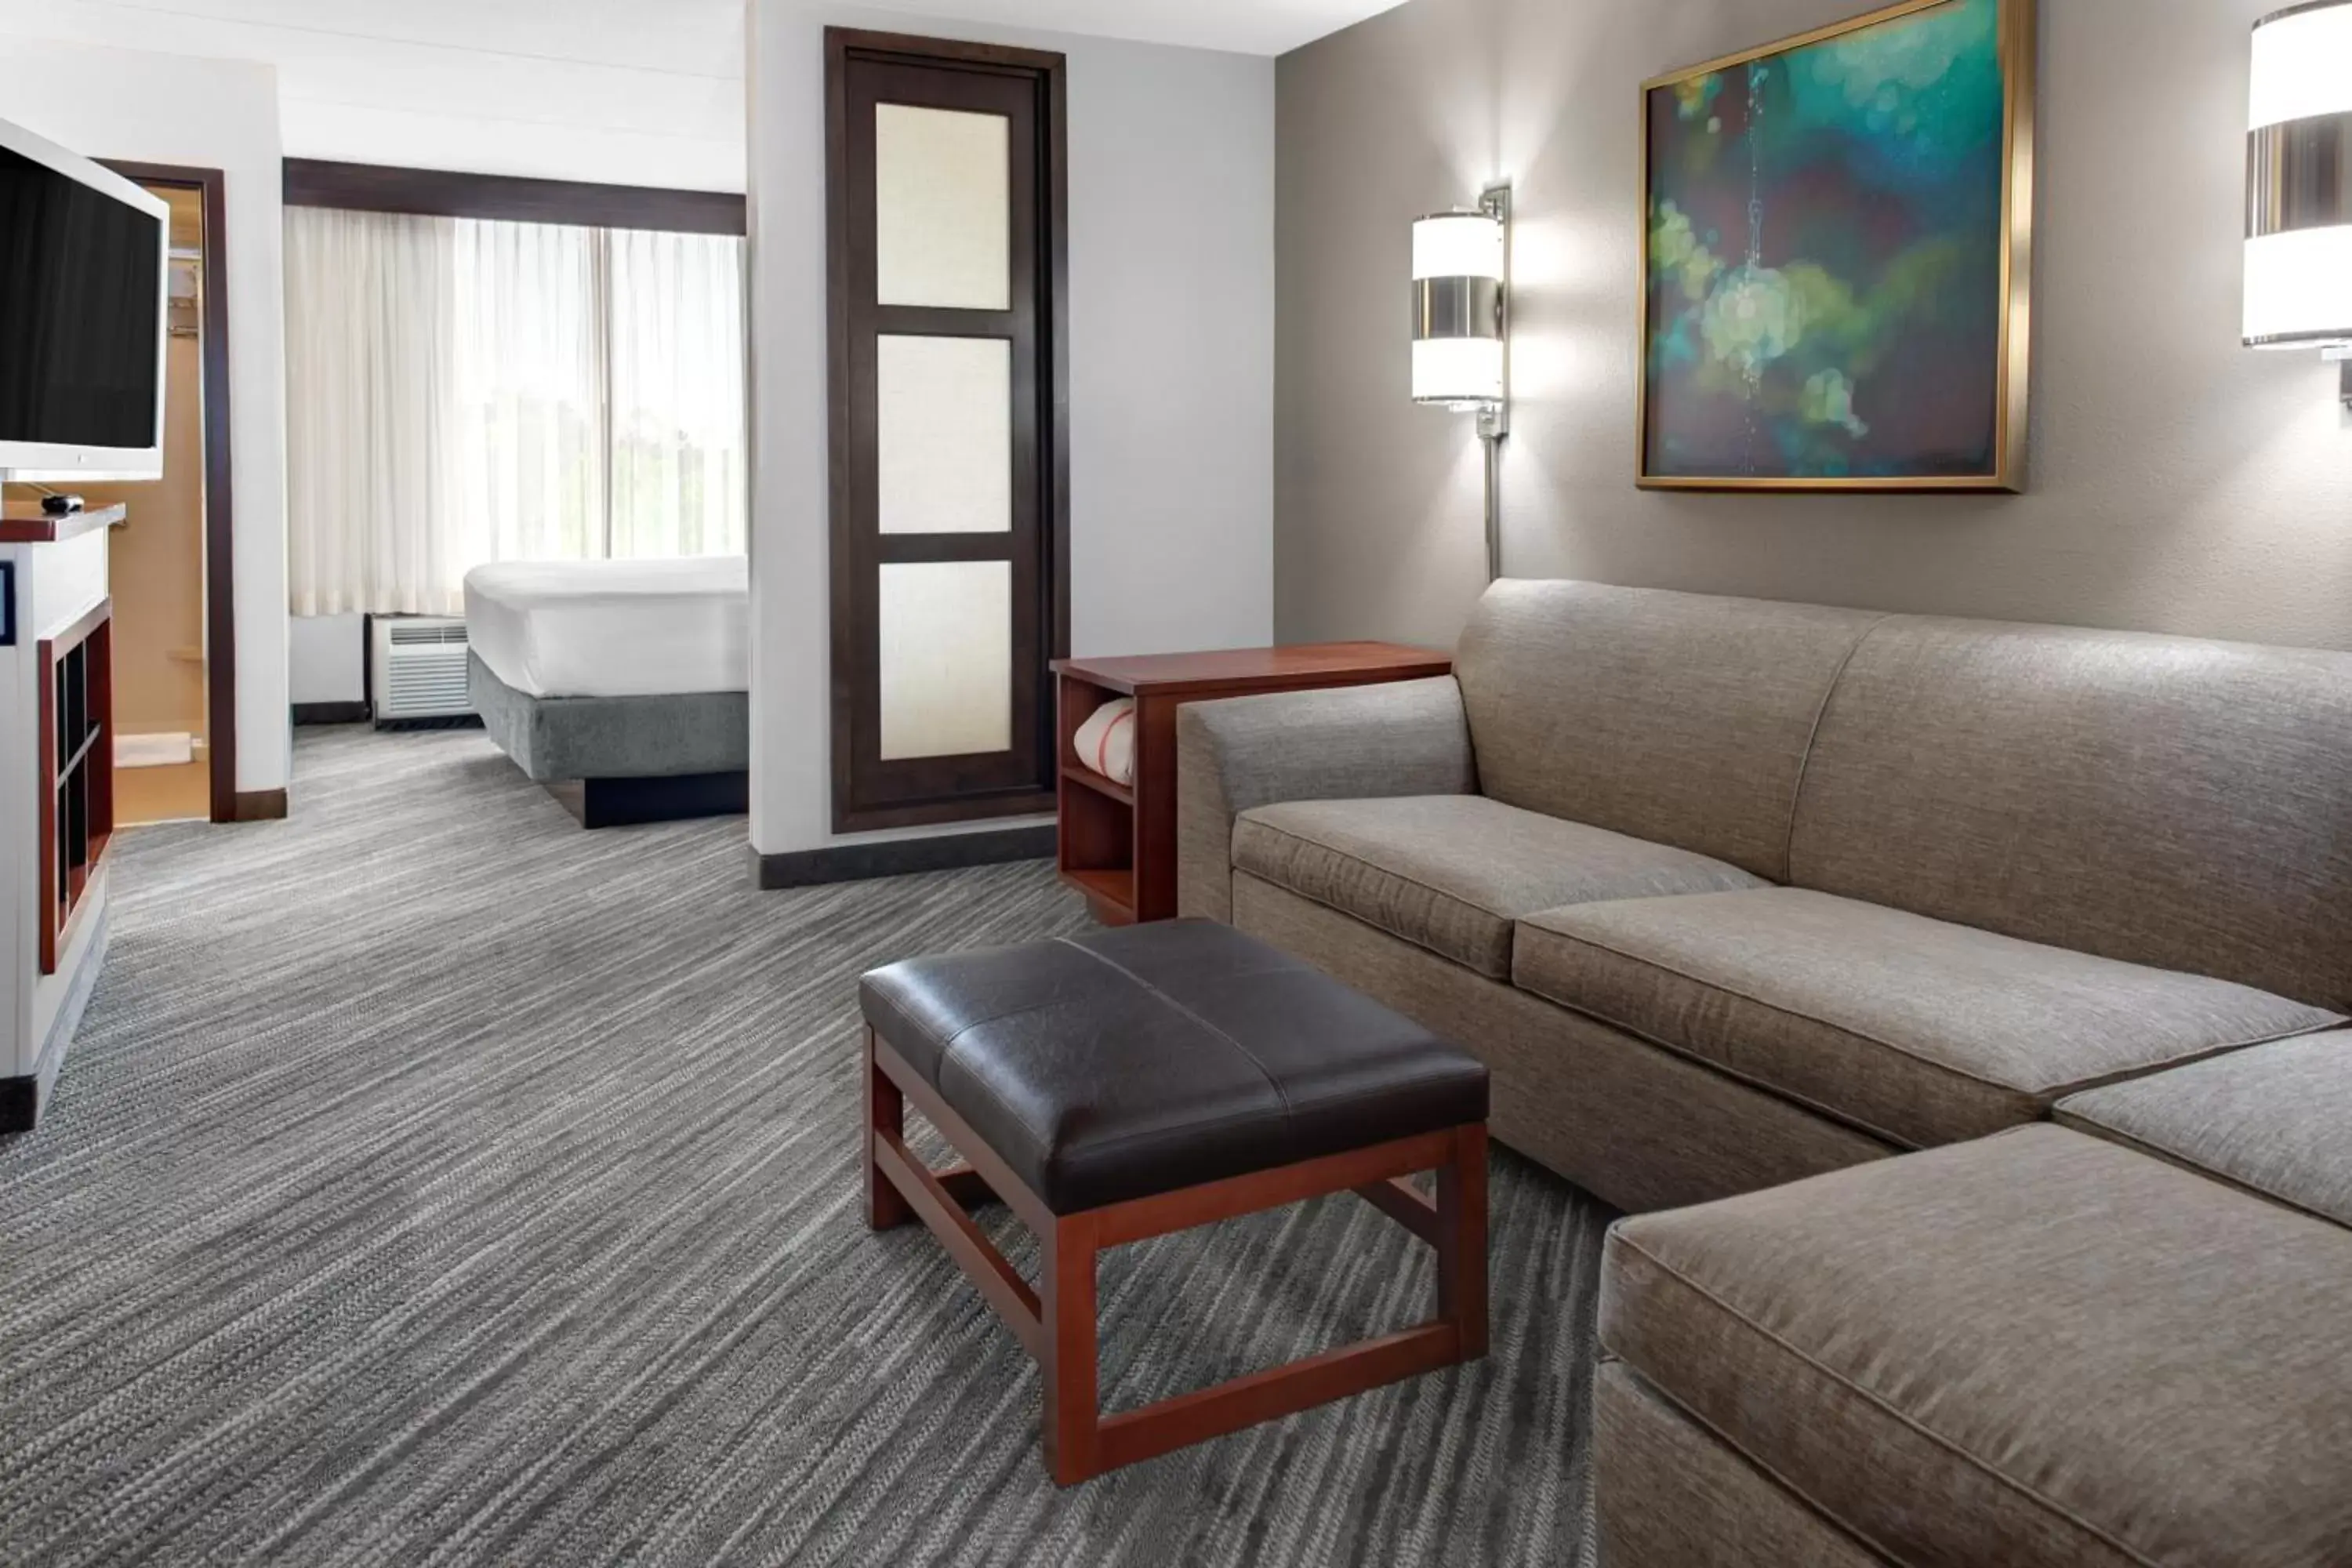 Specialty King Room with Sofa Bed in Hyatt Place Detroit/Auburn Hills